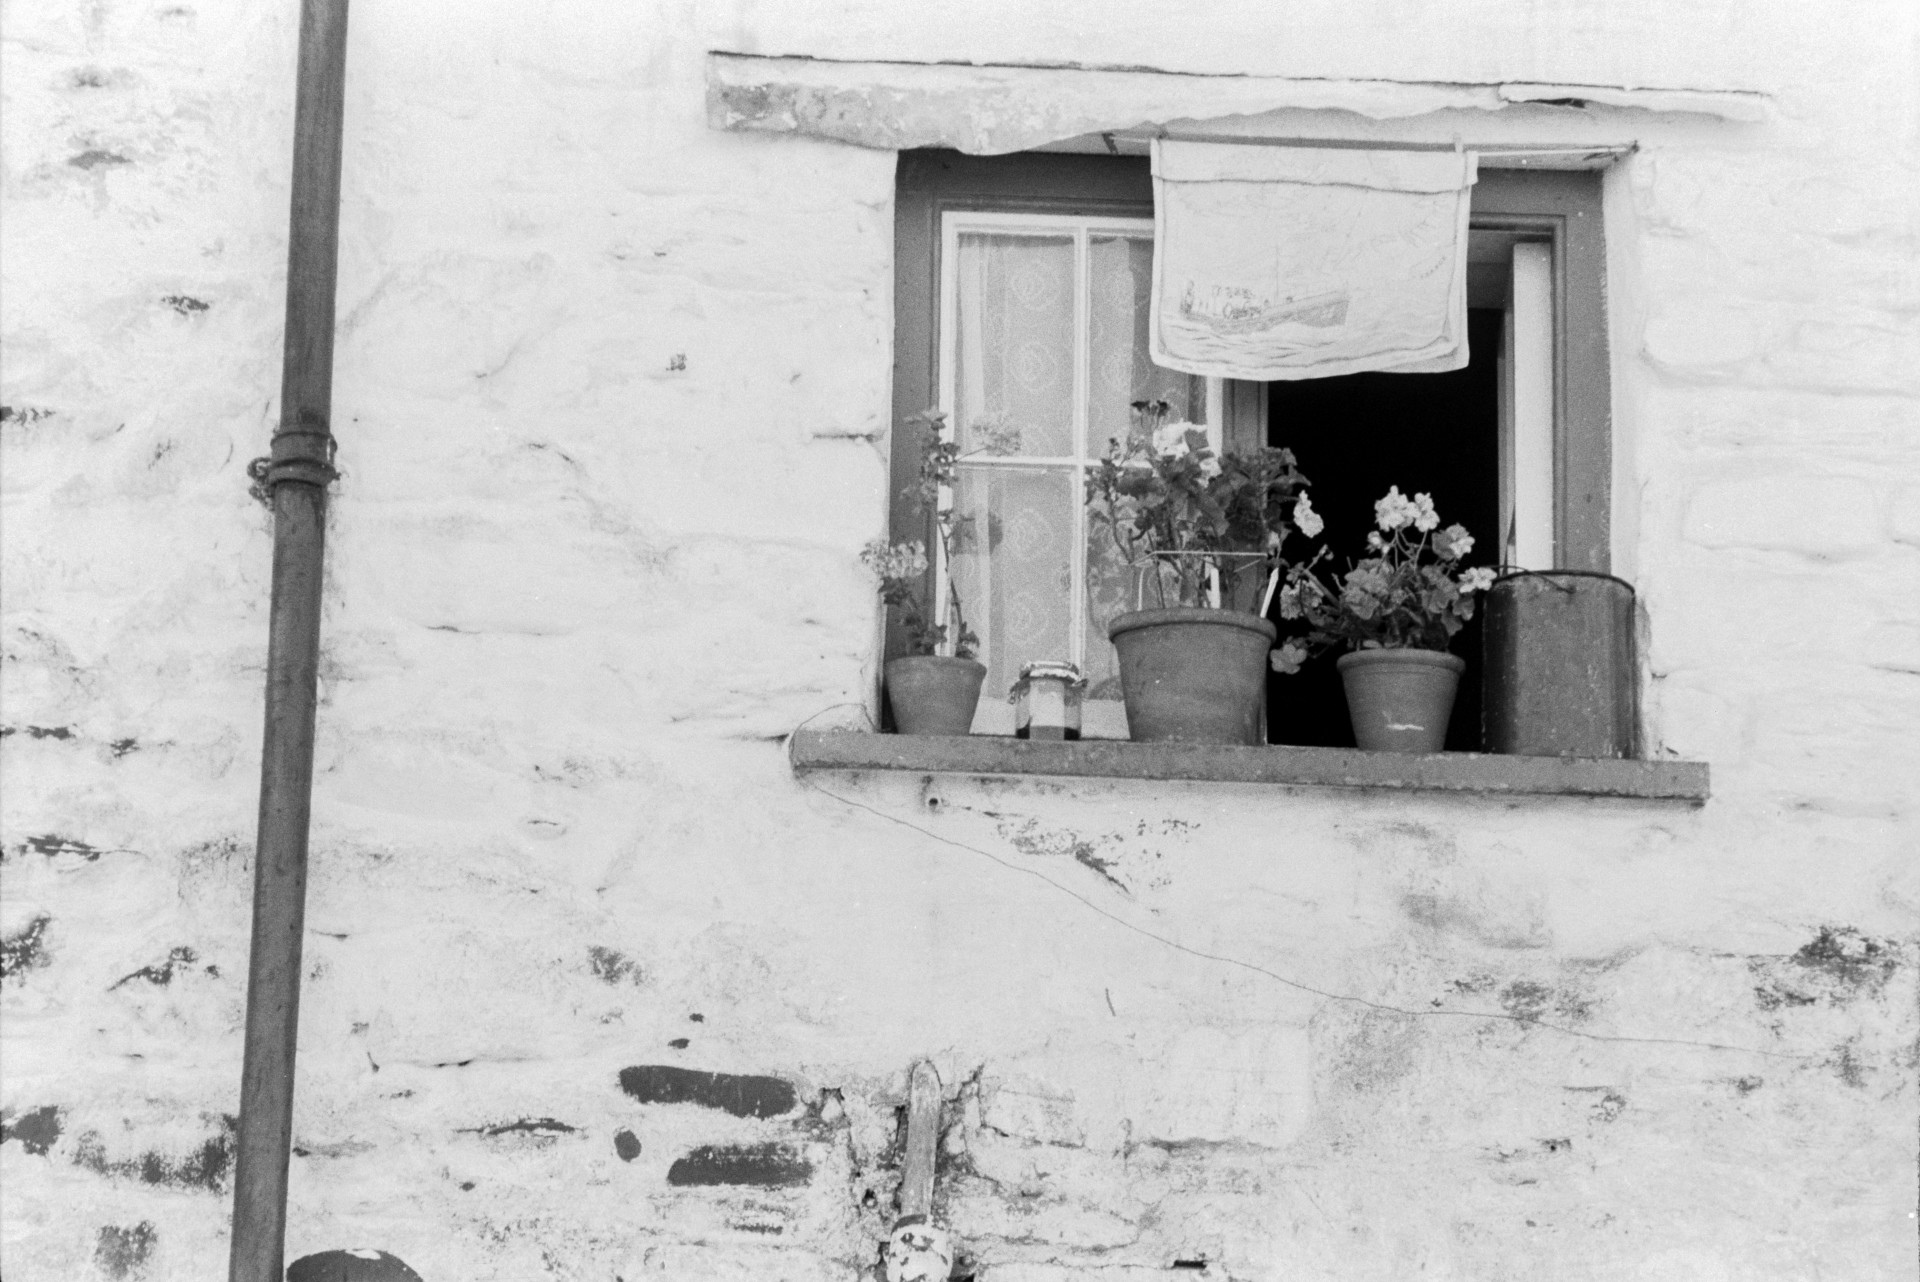 A window of a house in Clovelly with flower pots outside on the window sill. A tea towel is also hung up to dry.